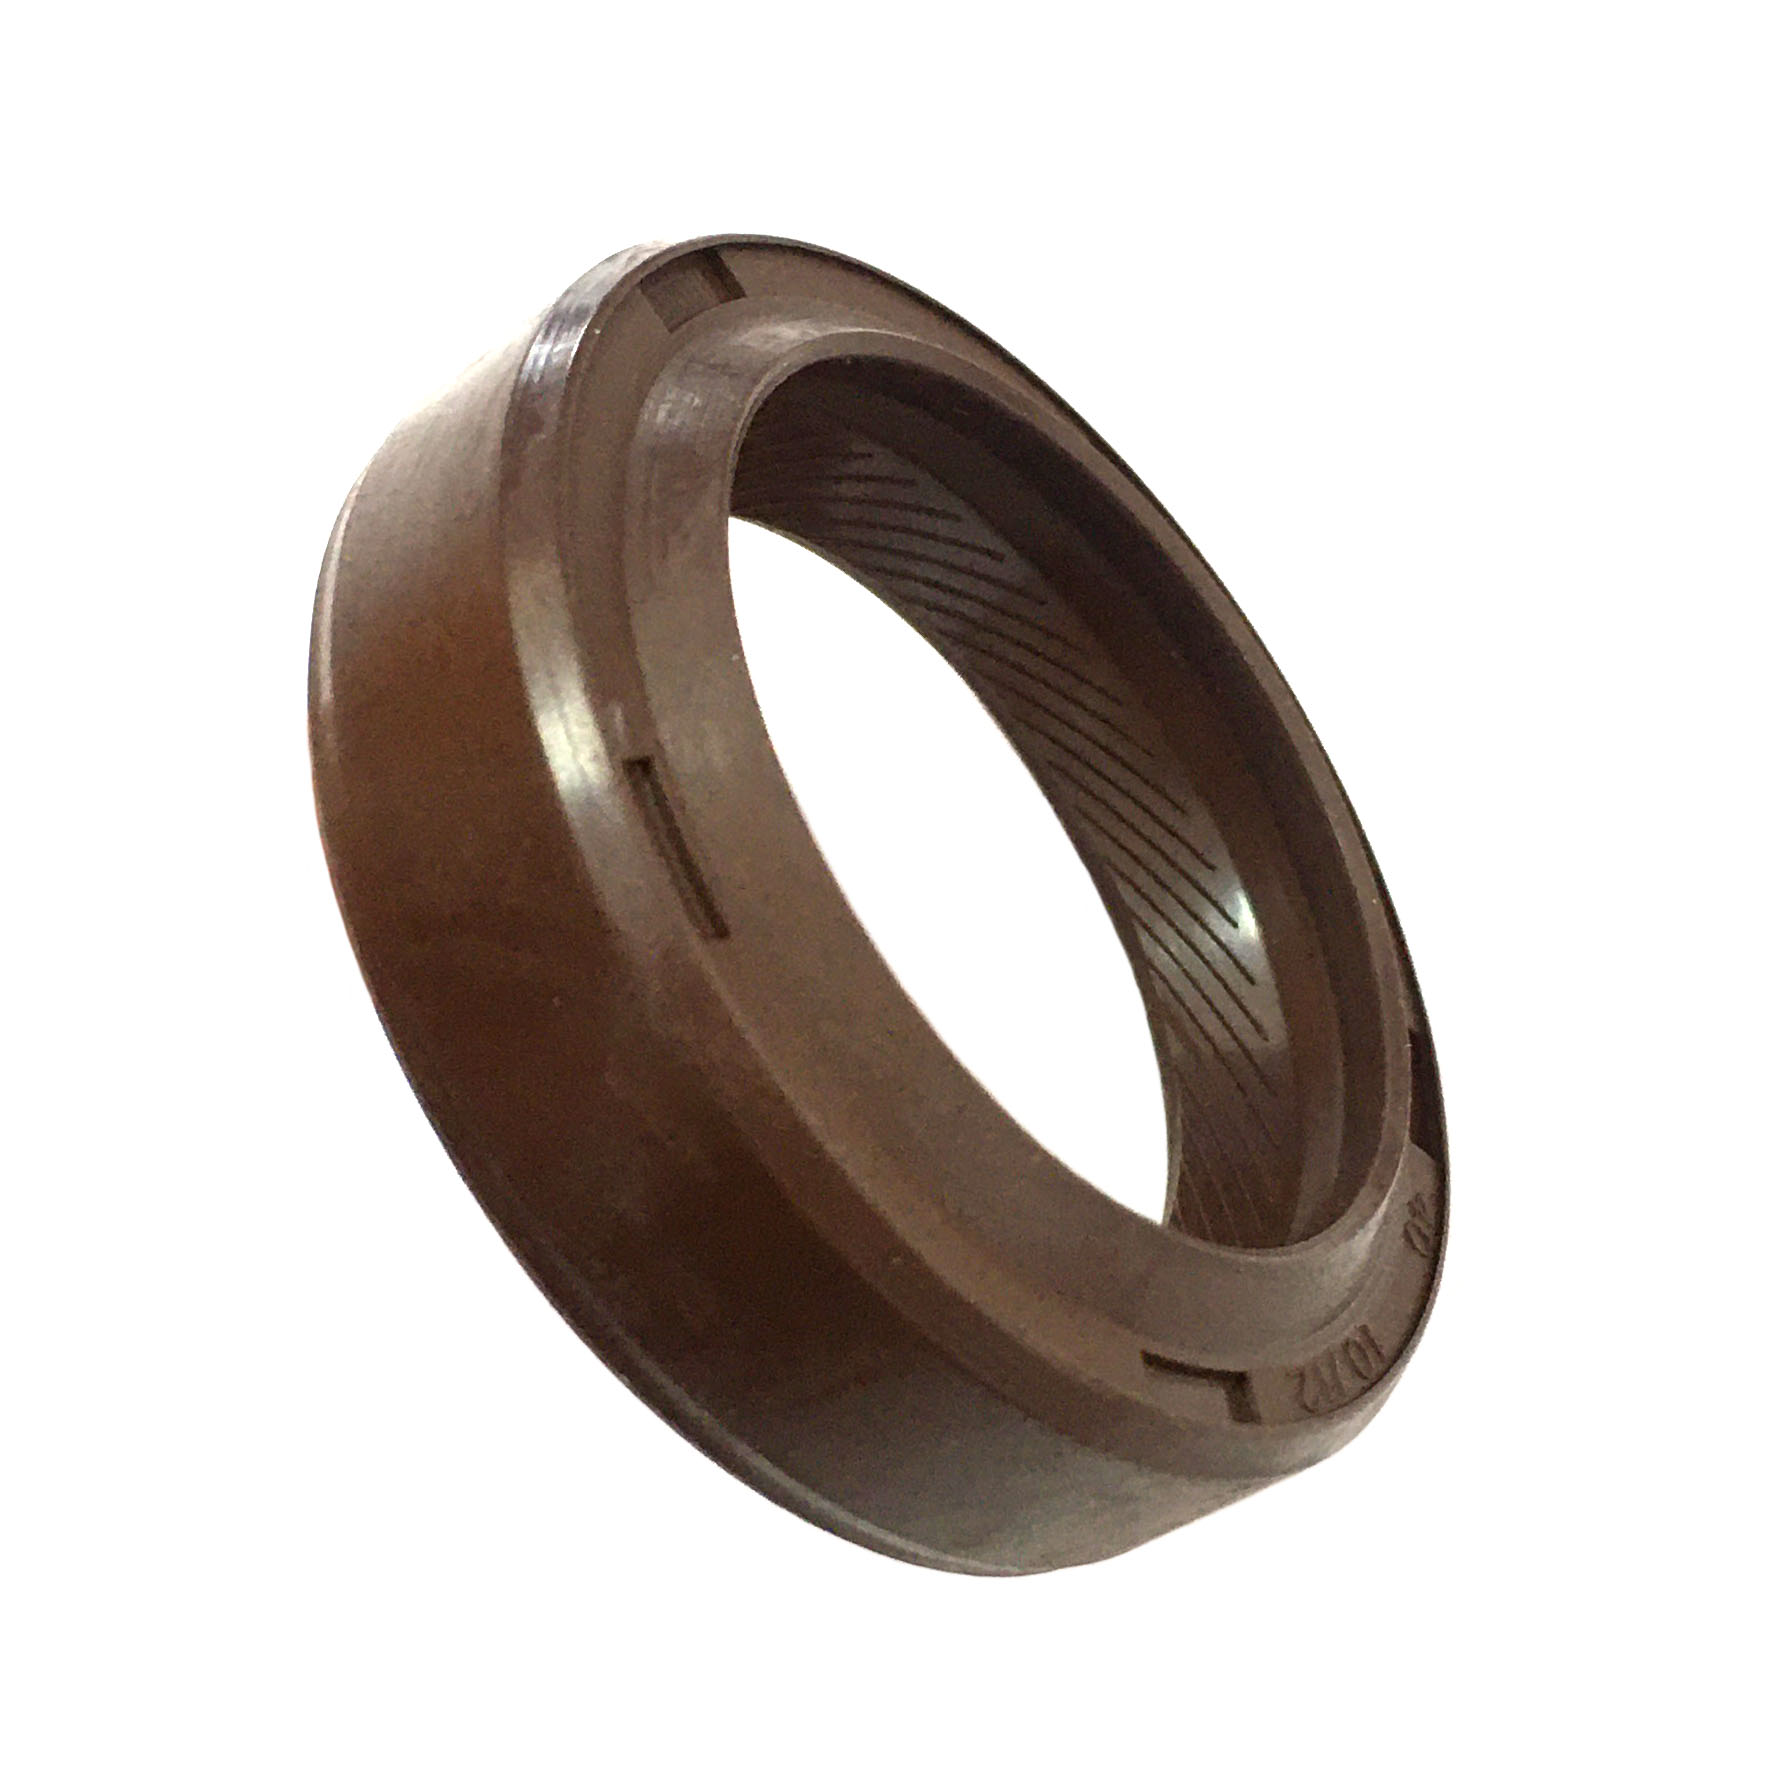 TCY Oil Seal 30*40*10/12